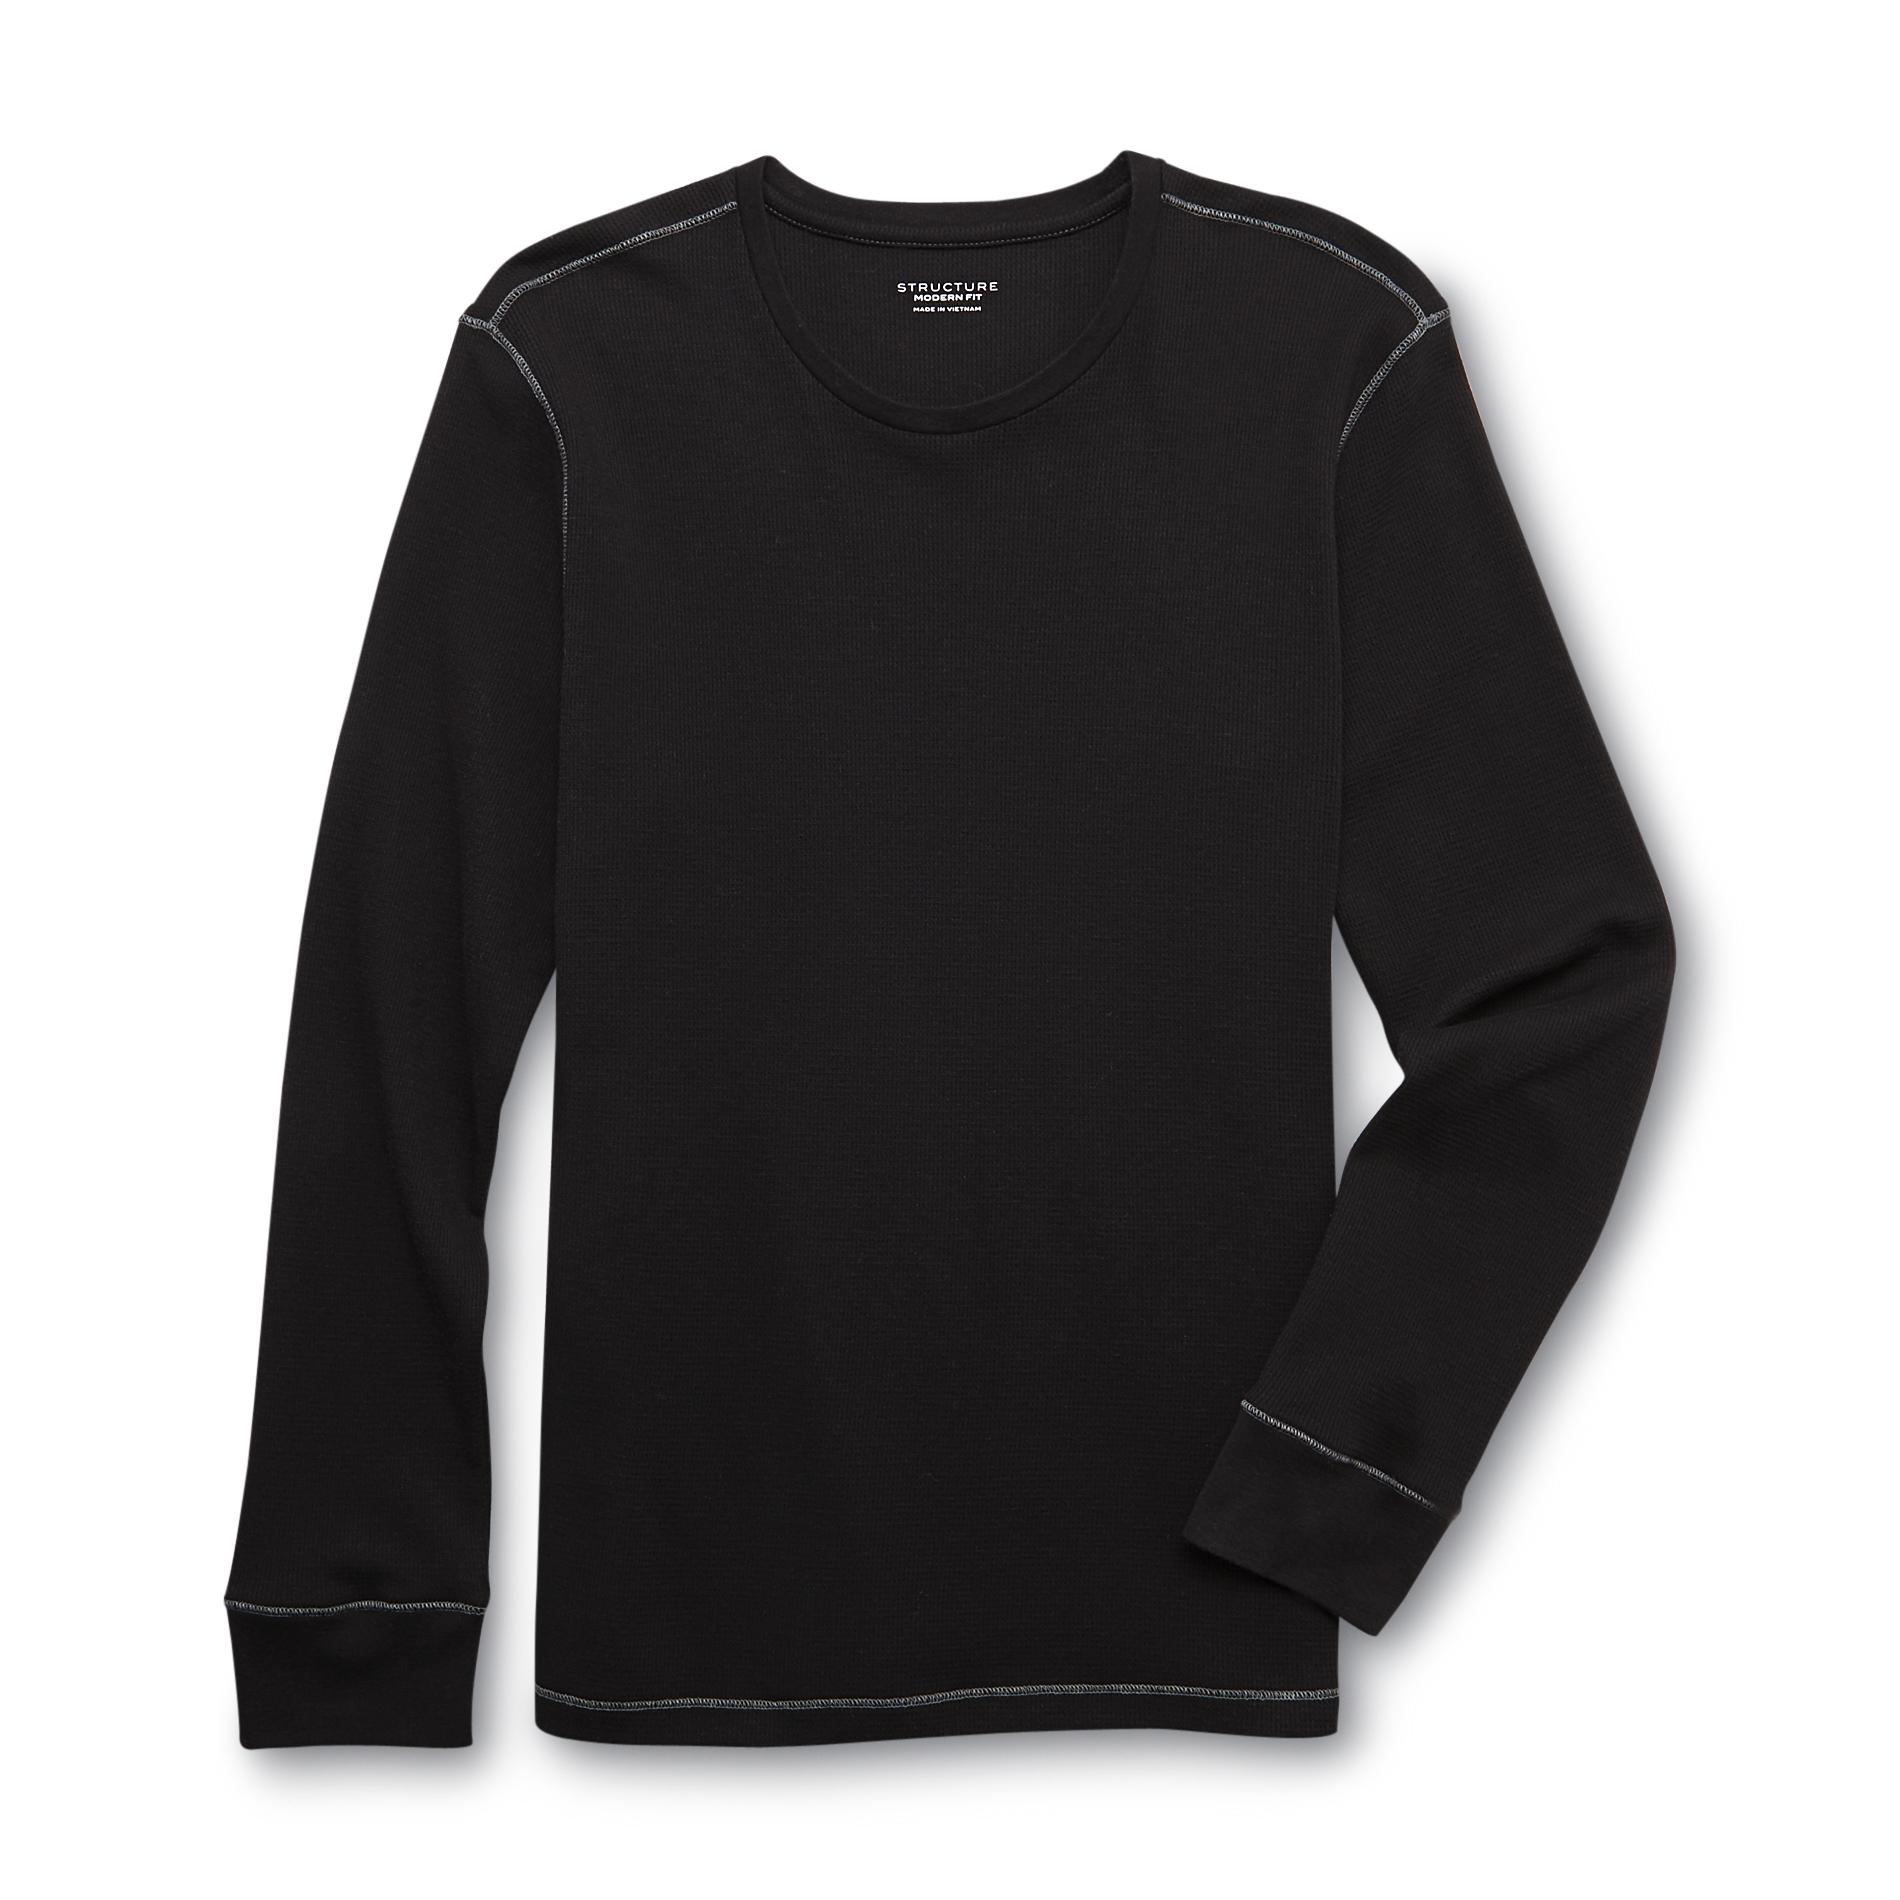 Structure Men's Thermal T-Shirt